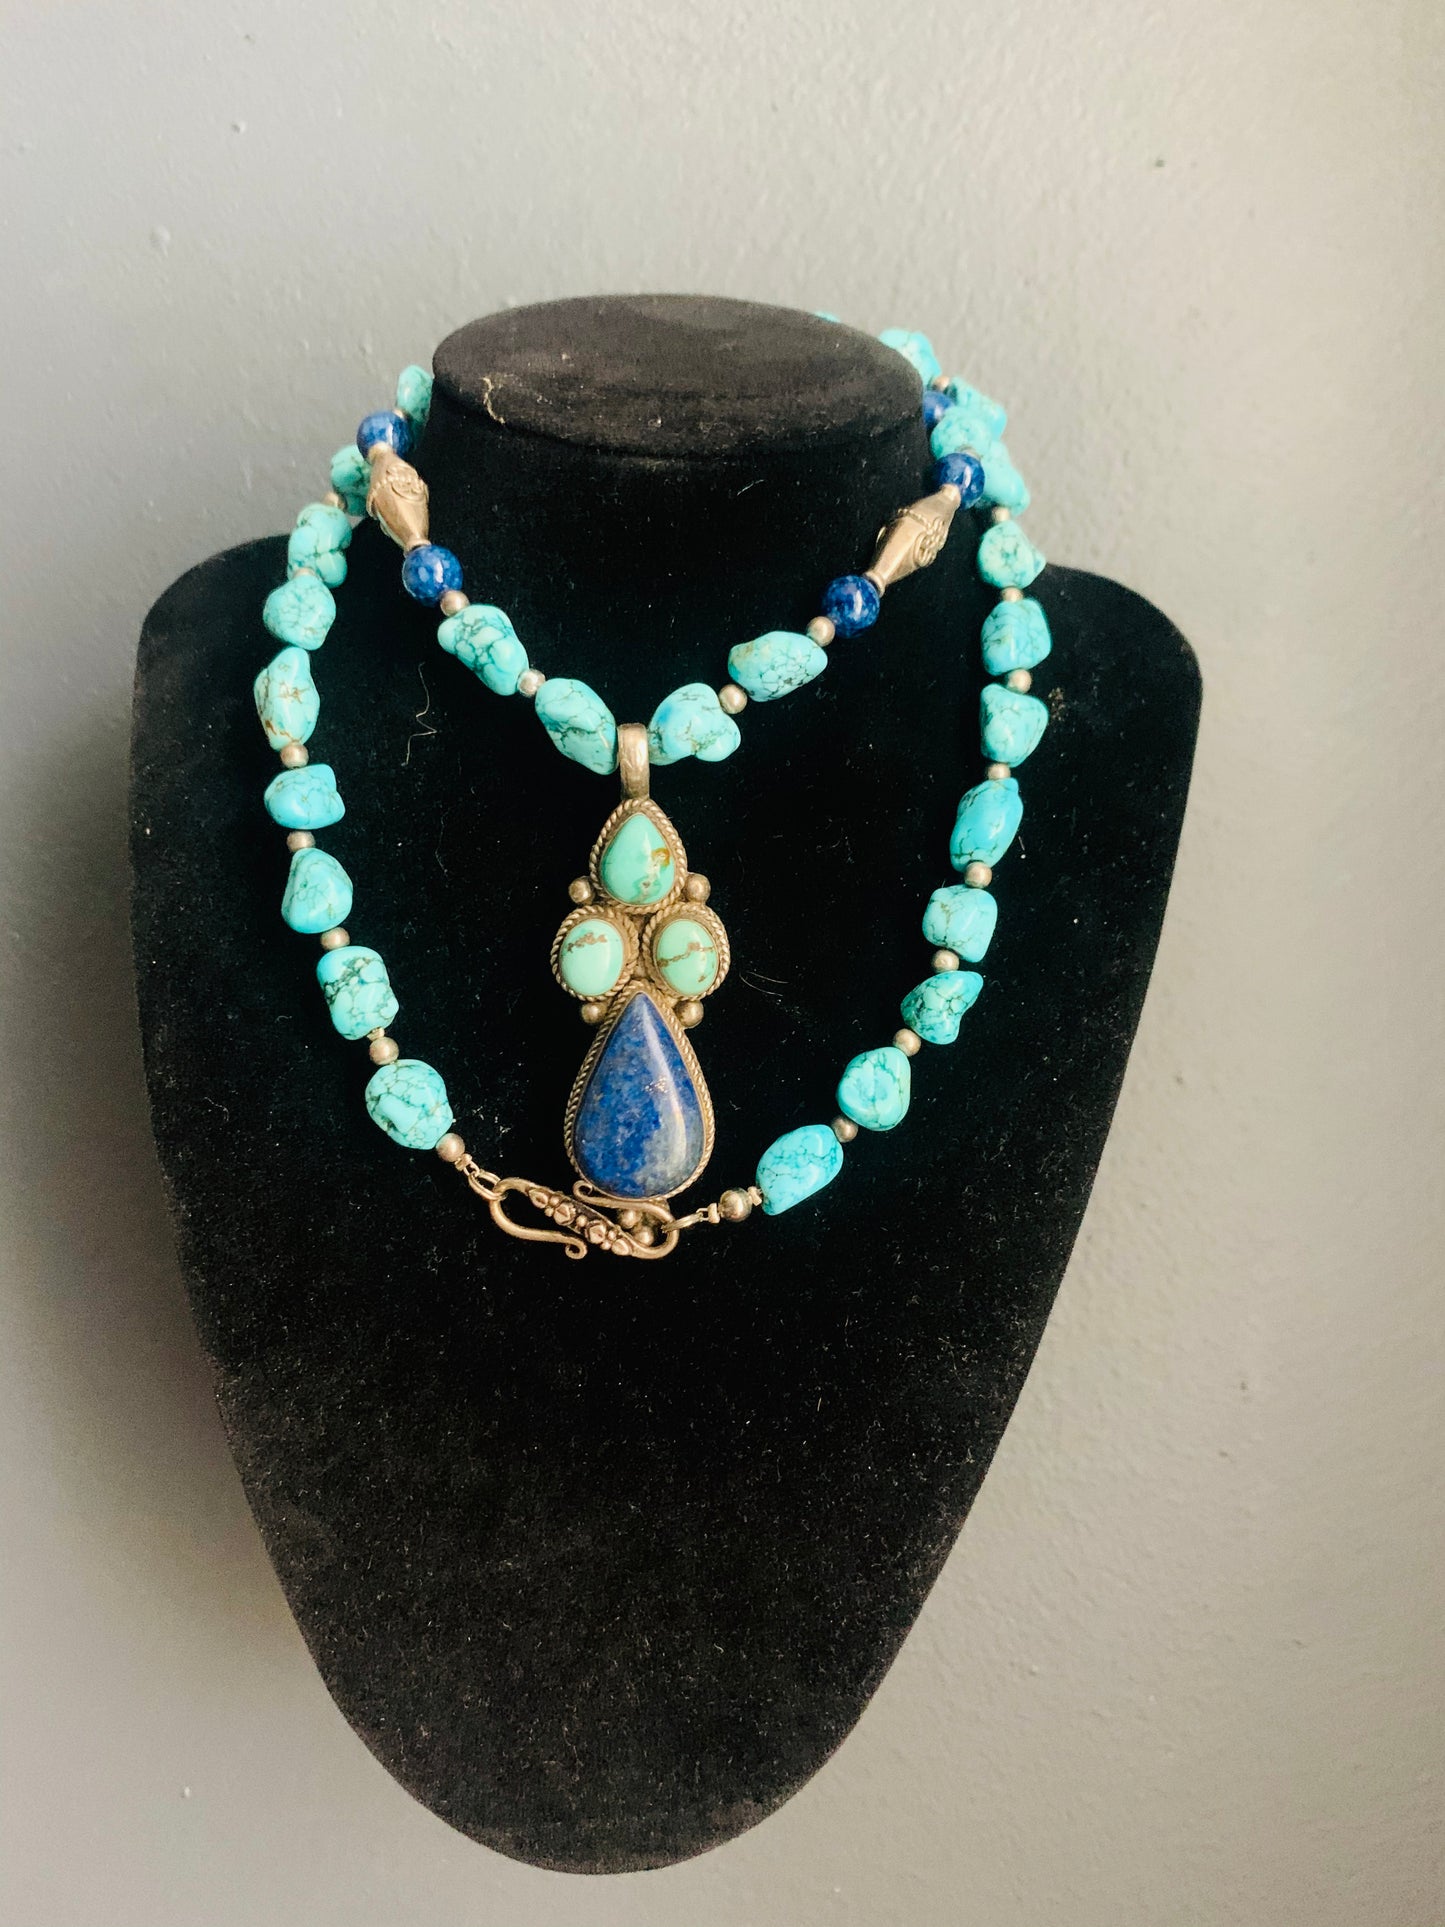 A turquoise and lapis necklace with pendant